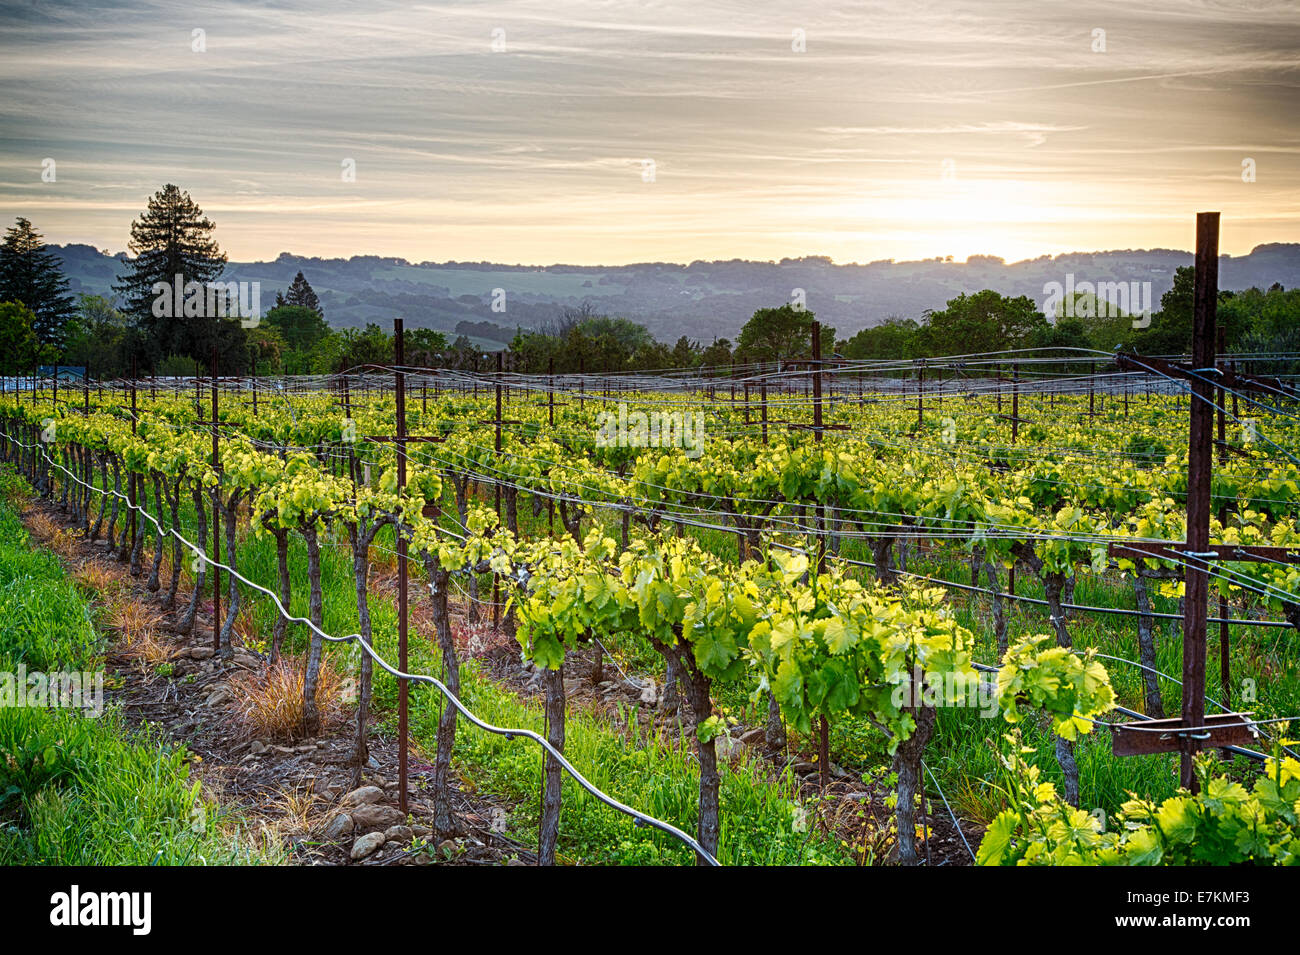 Sunset over vineyards in California's wine country. Sonoma county, California Stock Photo